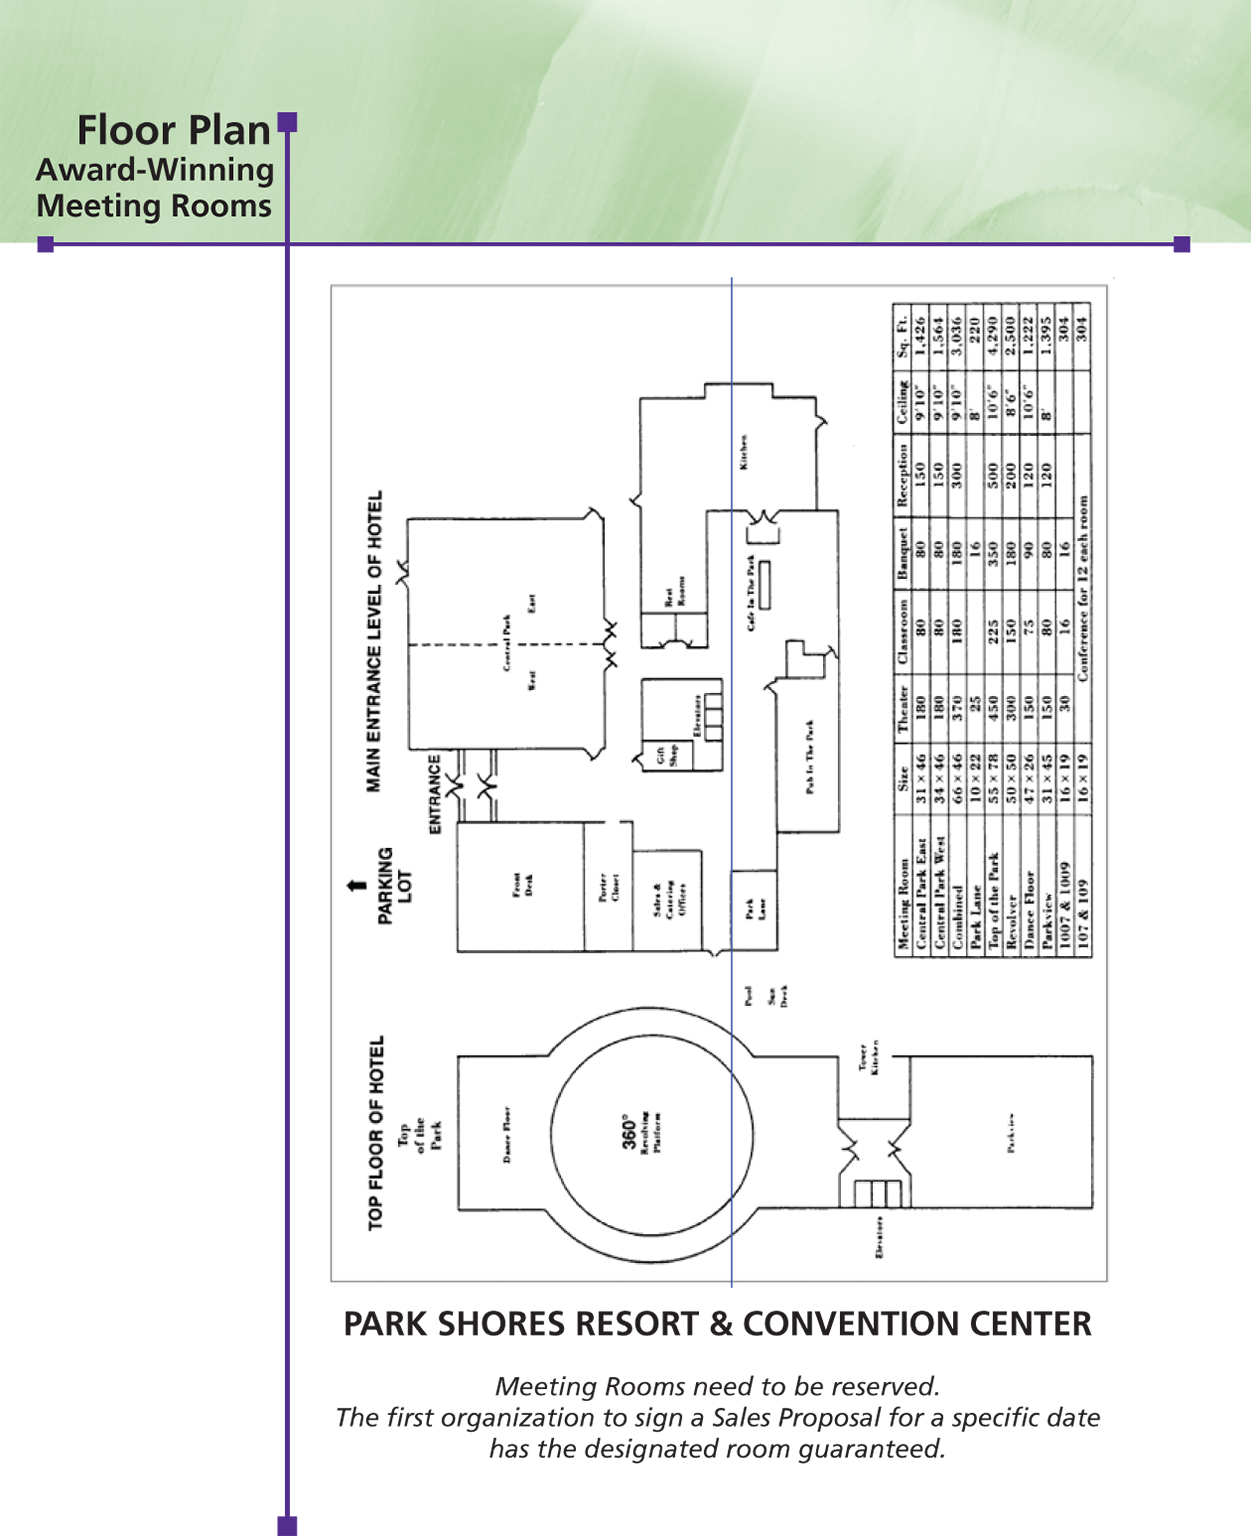 A page titled “floor plan award-winning meeting rooms” shows a floor plan of park shores resort & convention center and a text.